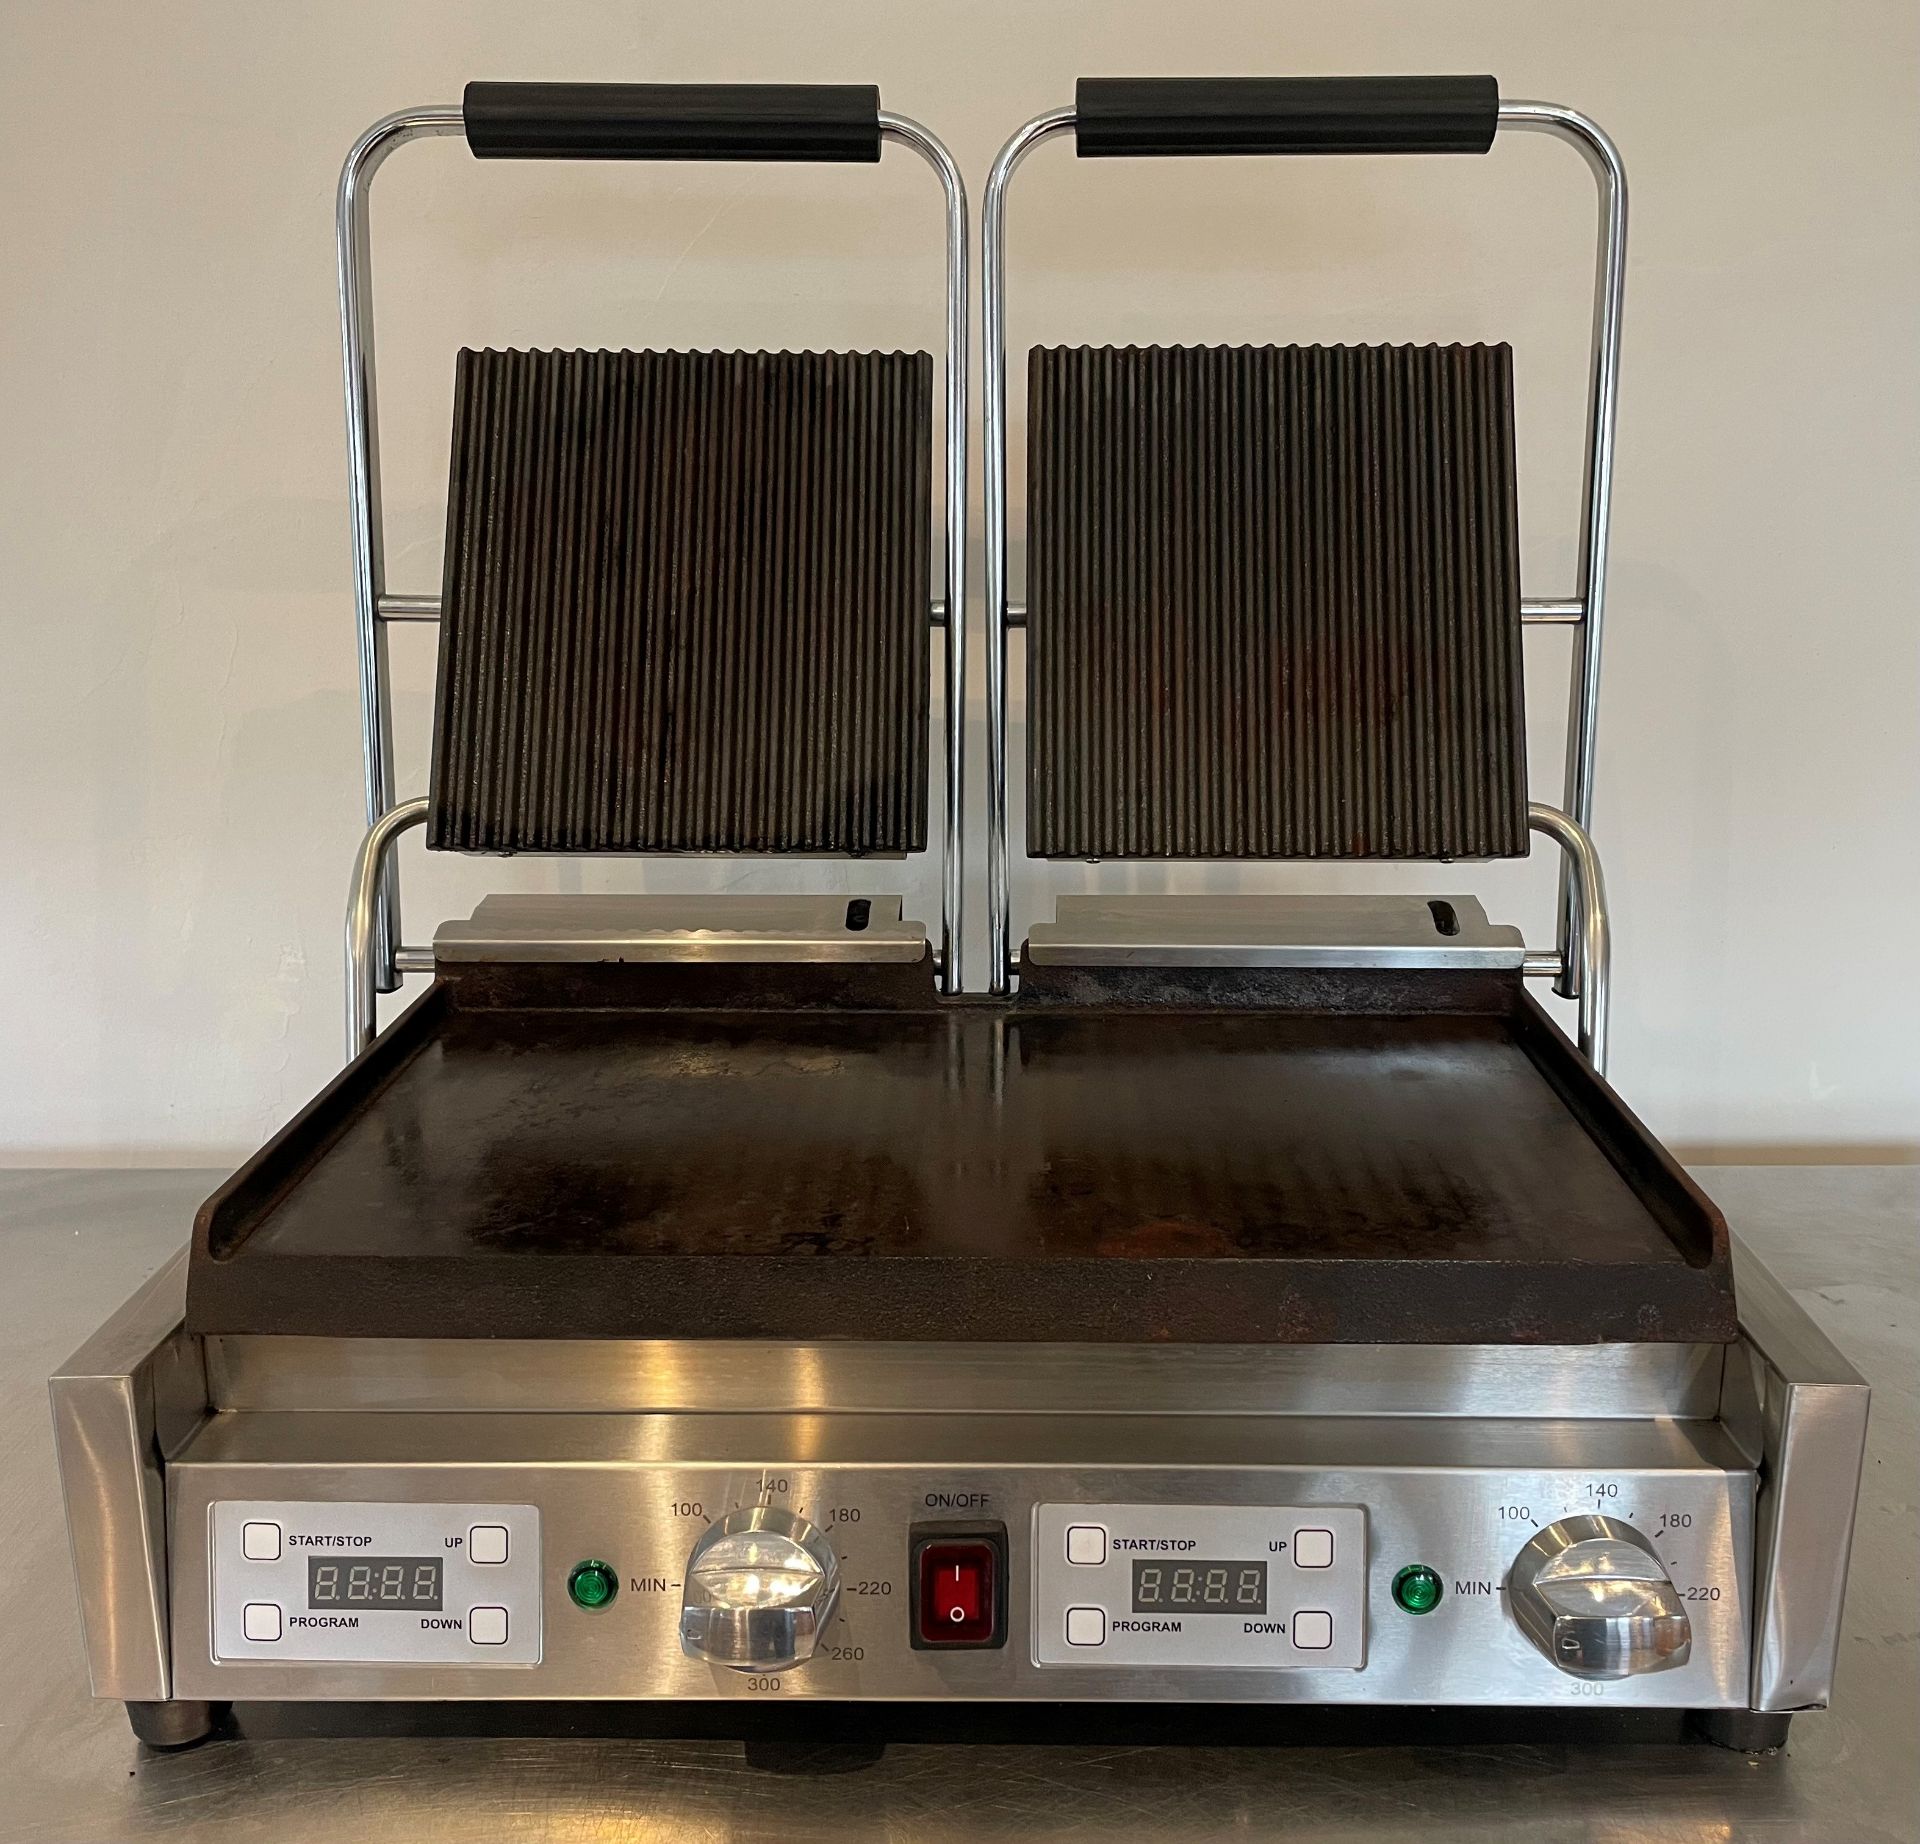 Buffalo FC385-02 Double Ribbed Top Contact Grill. Dimensions 210(H) x 550(W) x 395(D)mm.